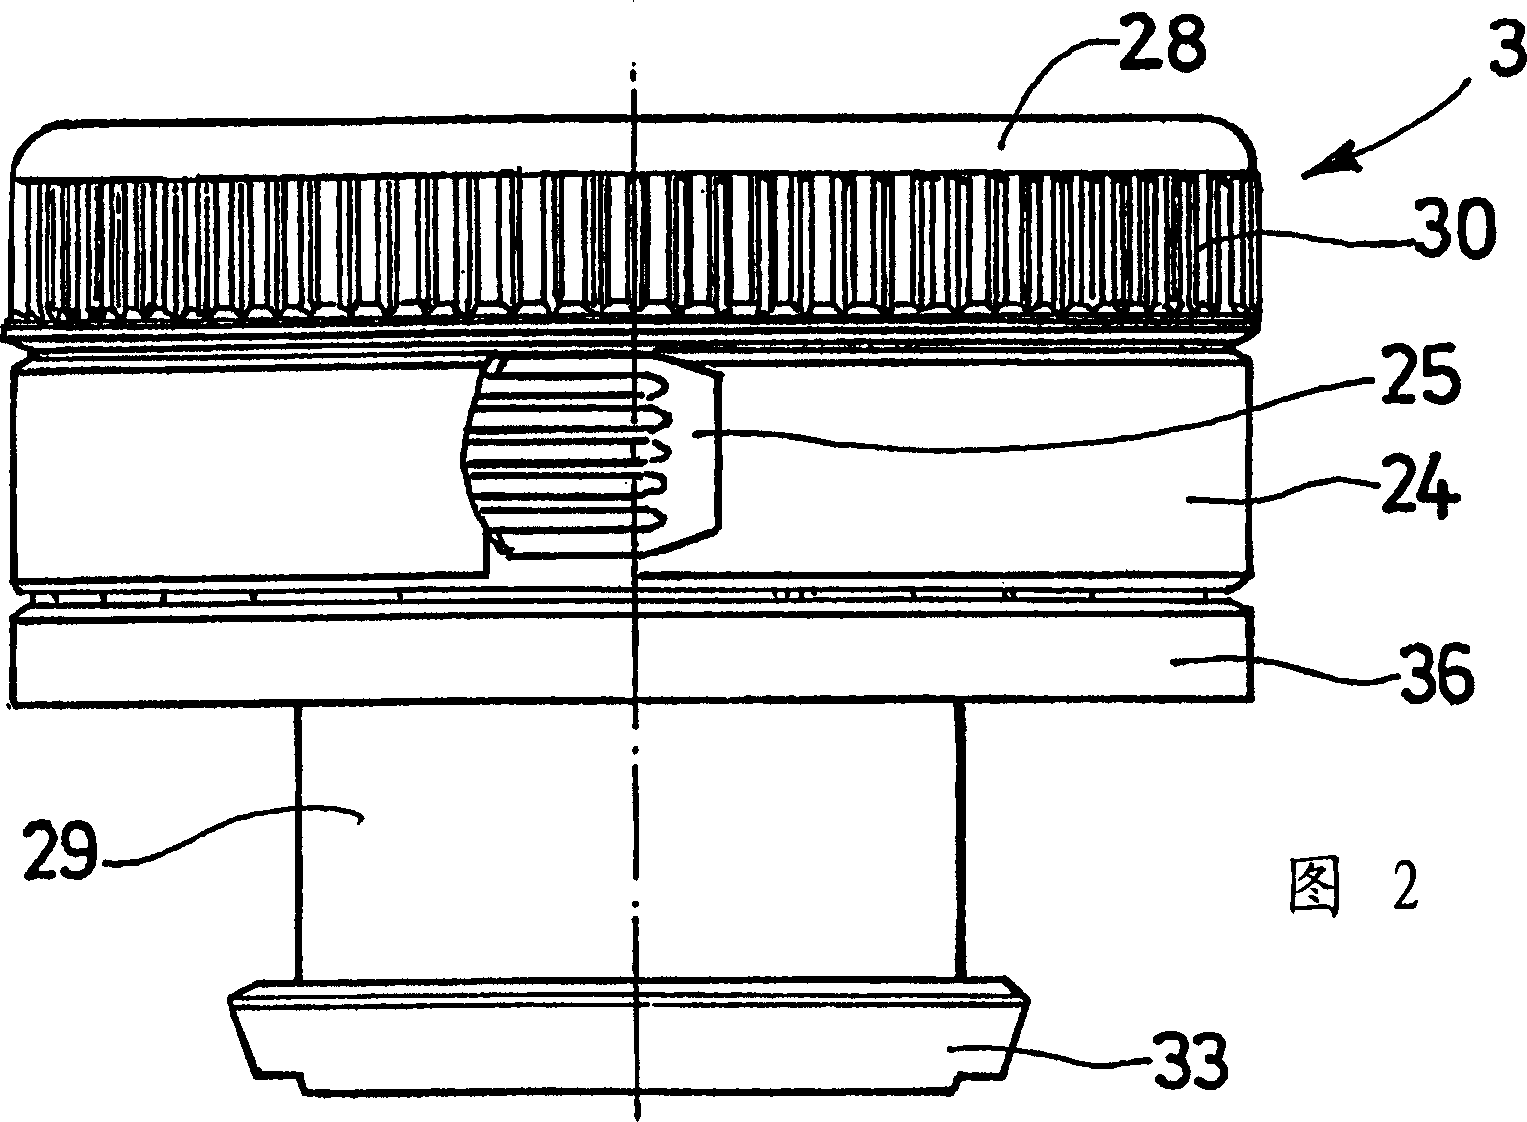 Device for closing a container and removing a fluid product